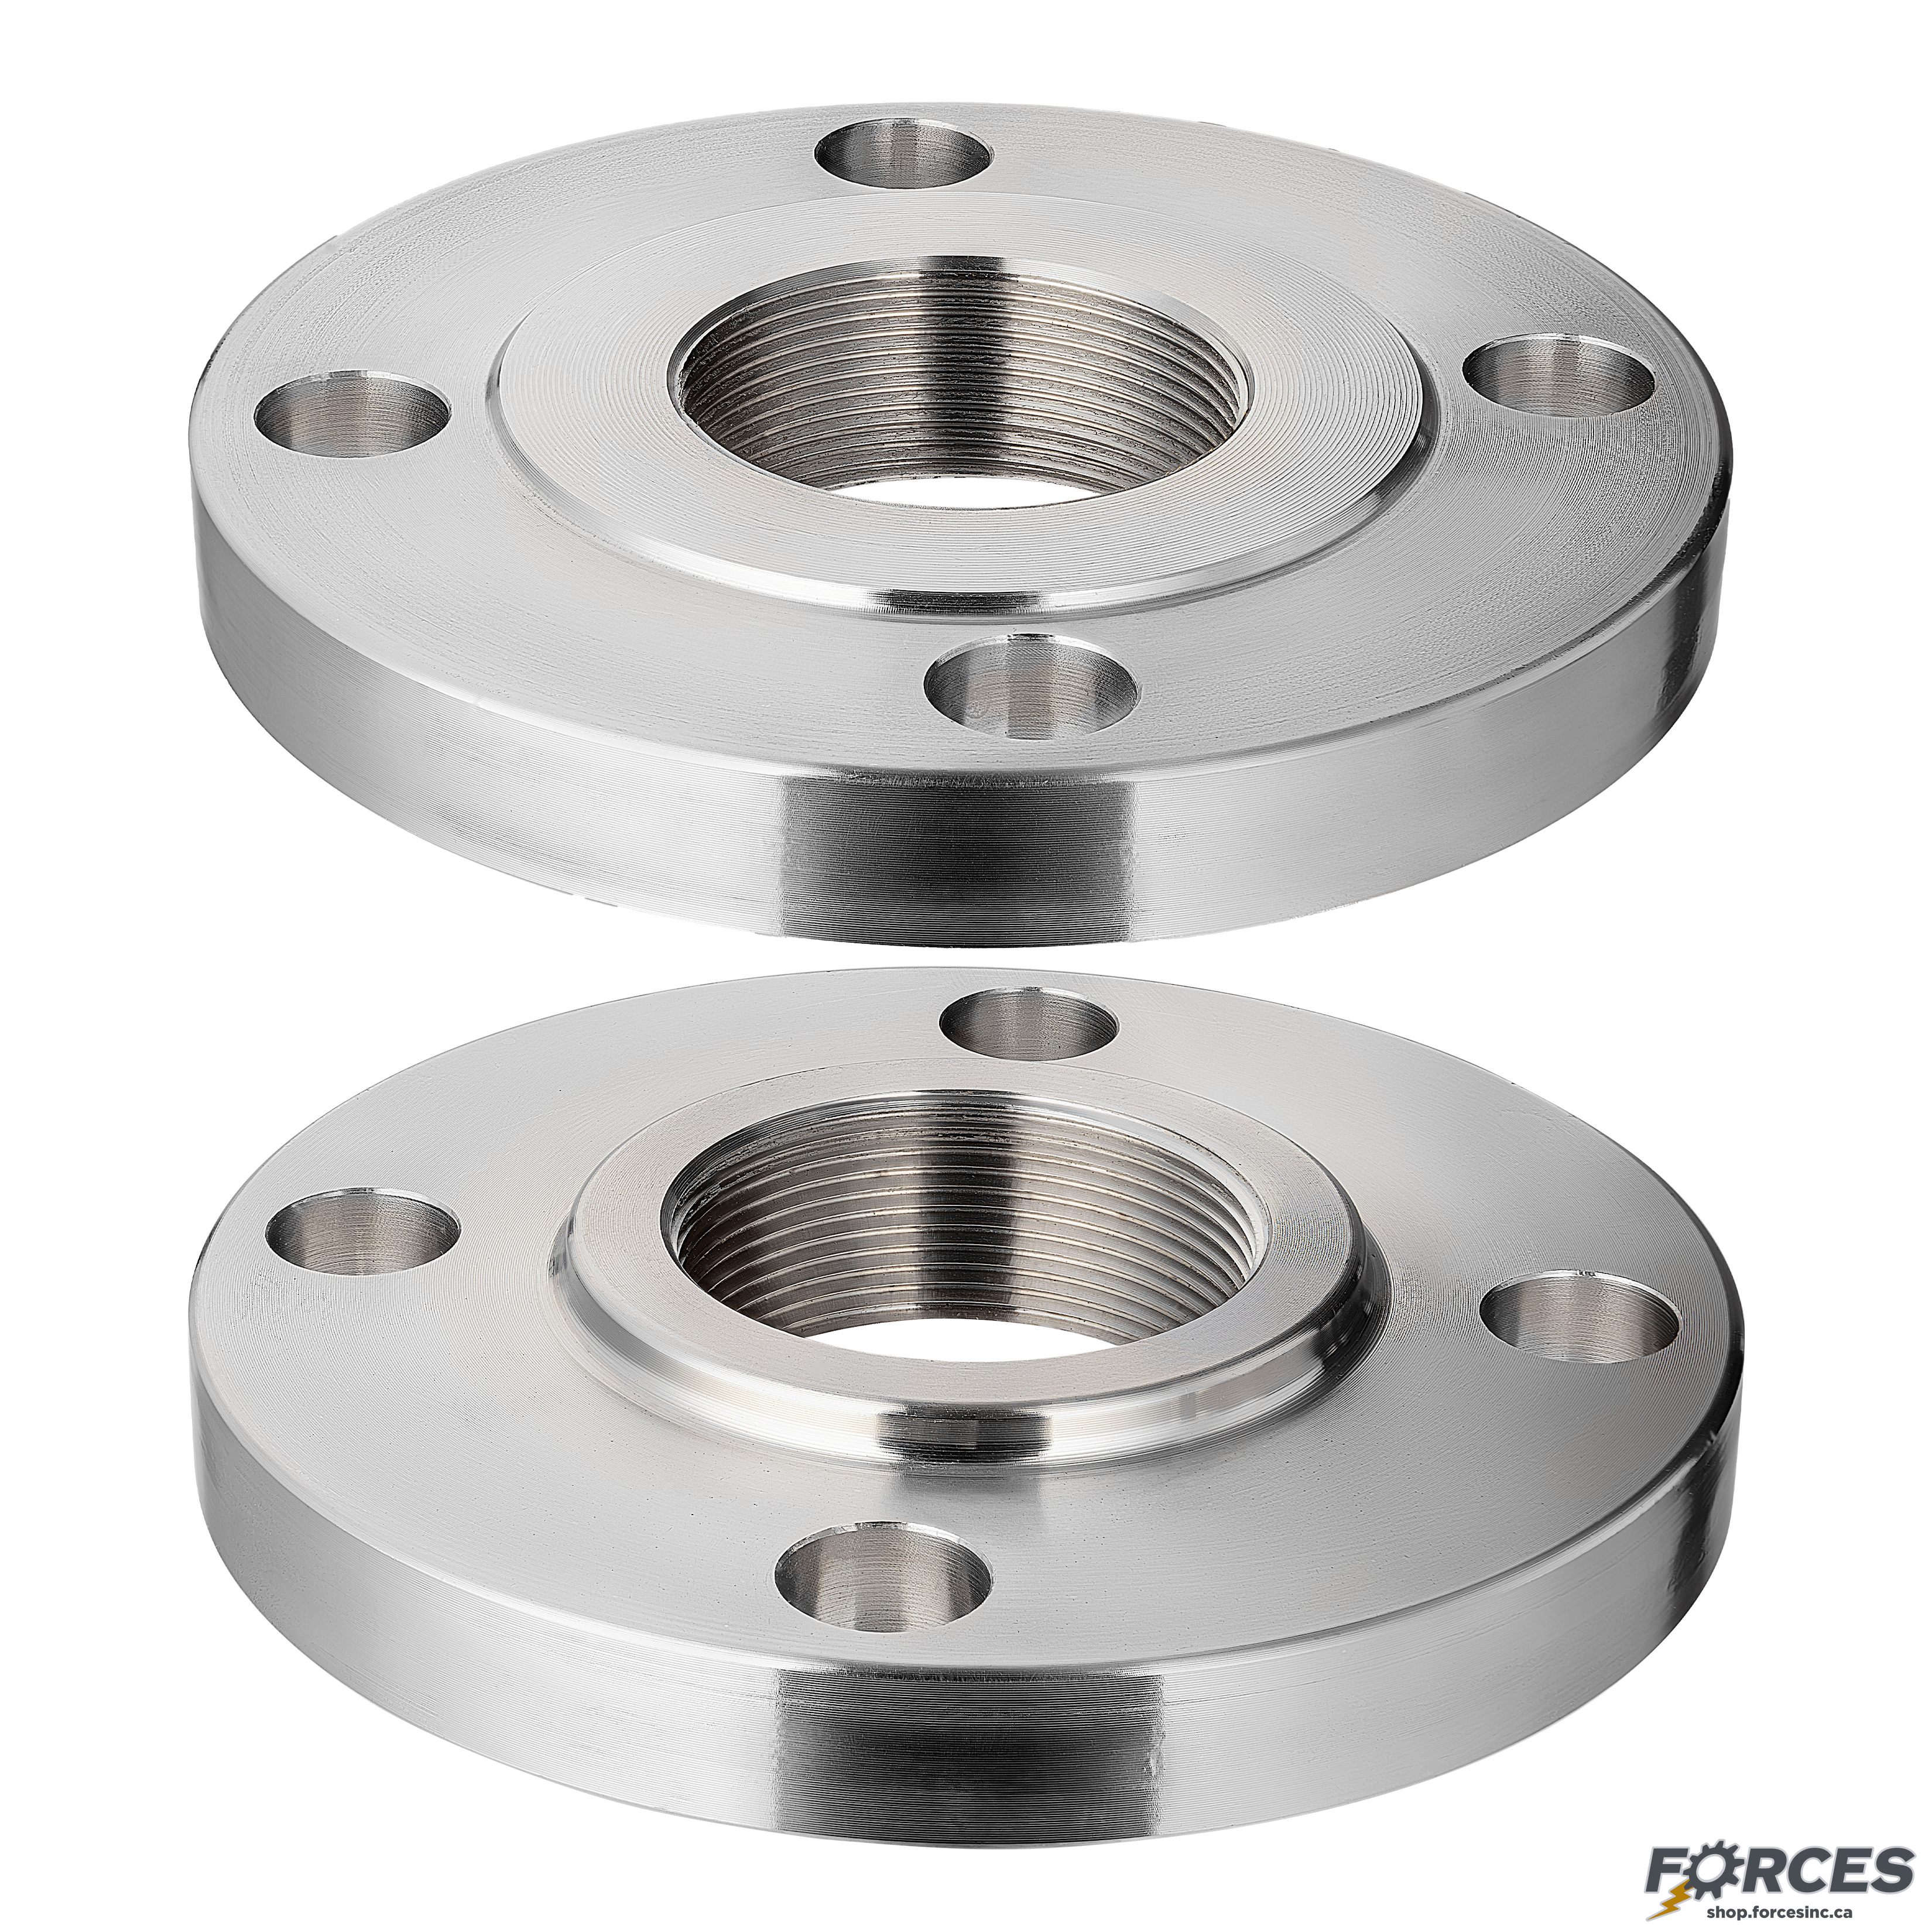 3/4" Threaded Flange NPT Class #150 - Stainless Steel 316 - Forces Inc